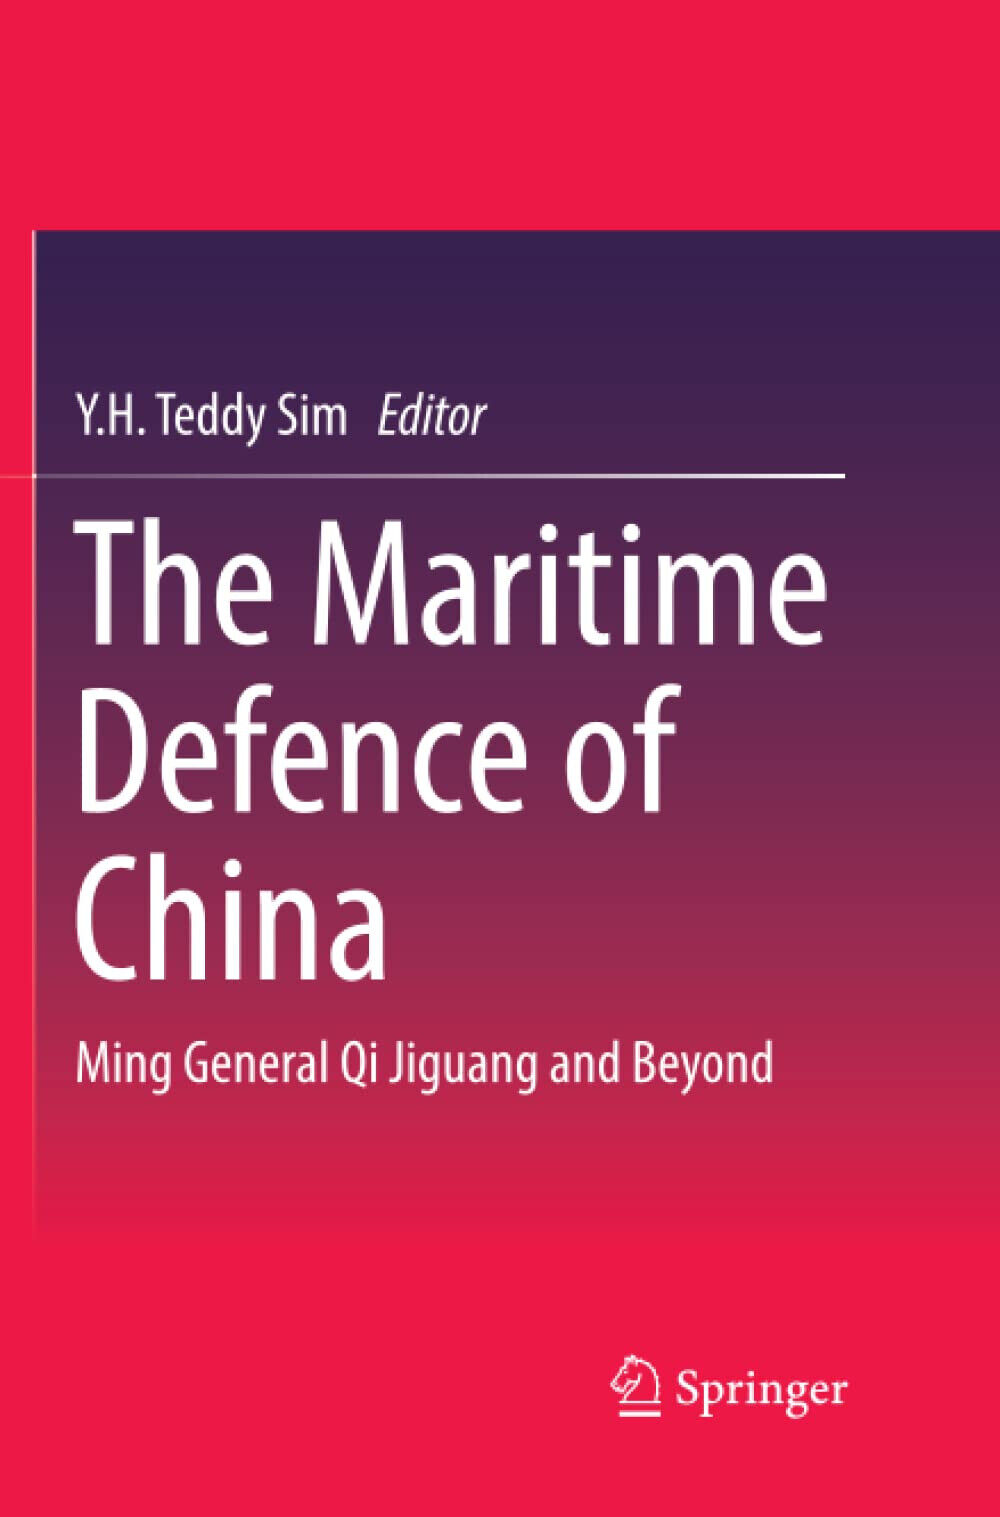 The Maritime Defence of China - Y.H. Teddy Sim - Springer, 2018